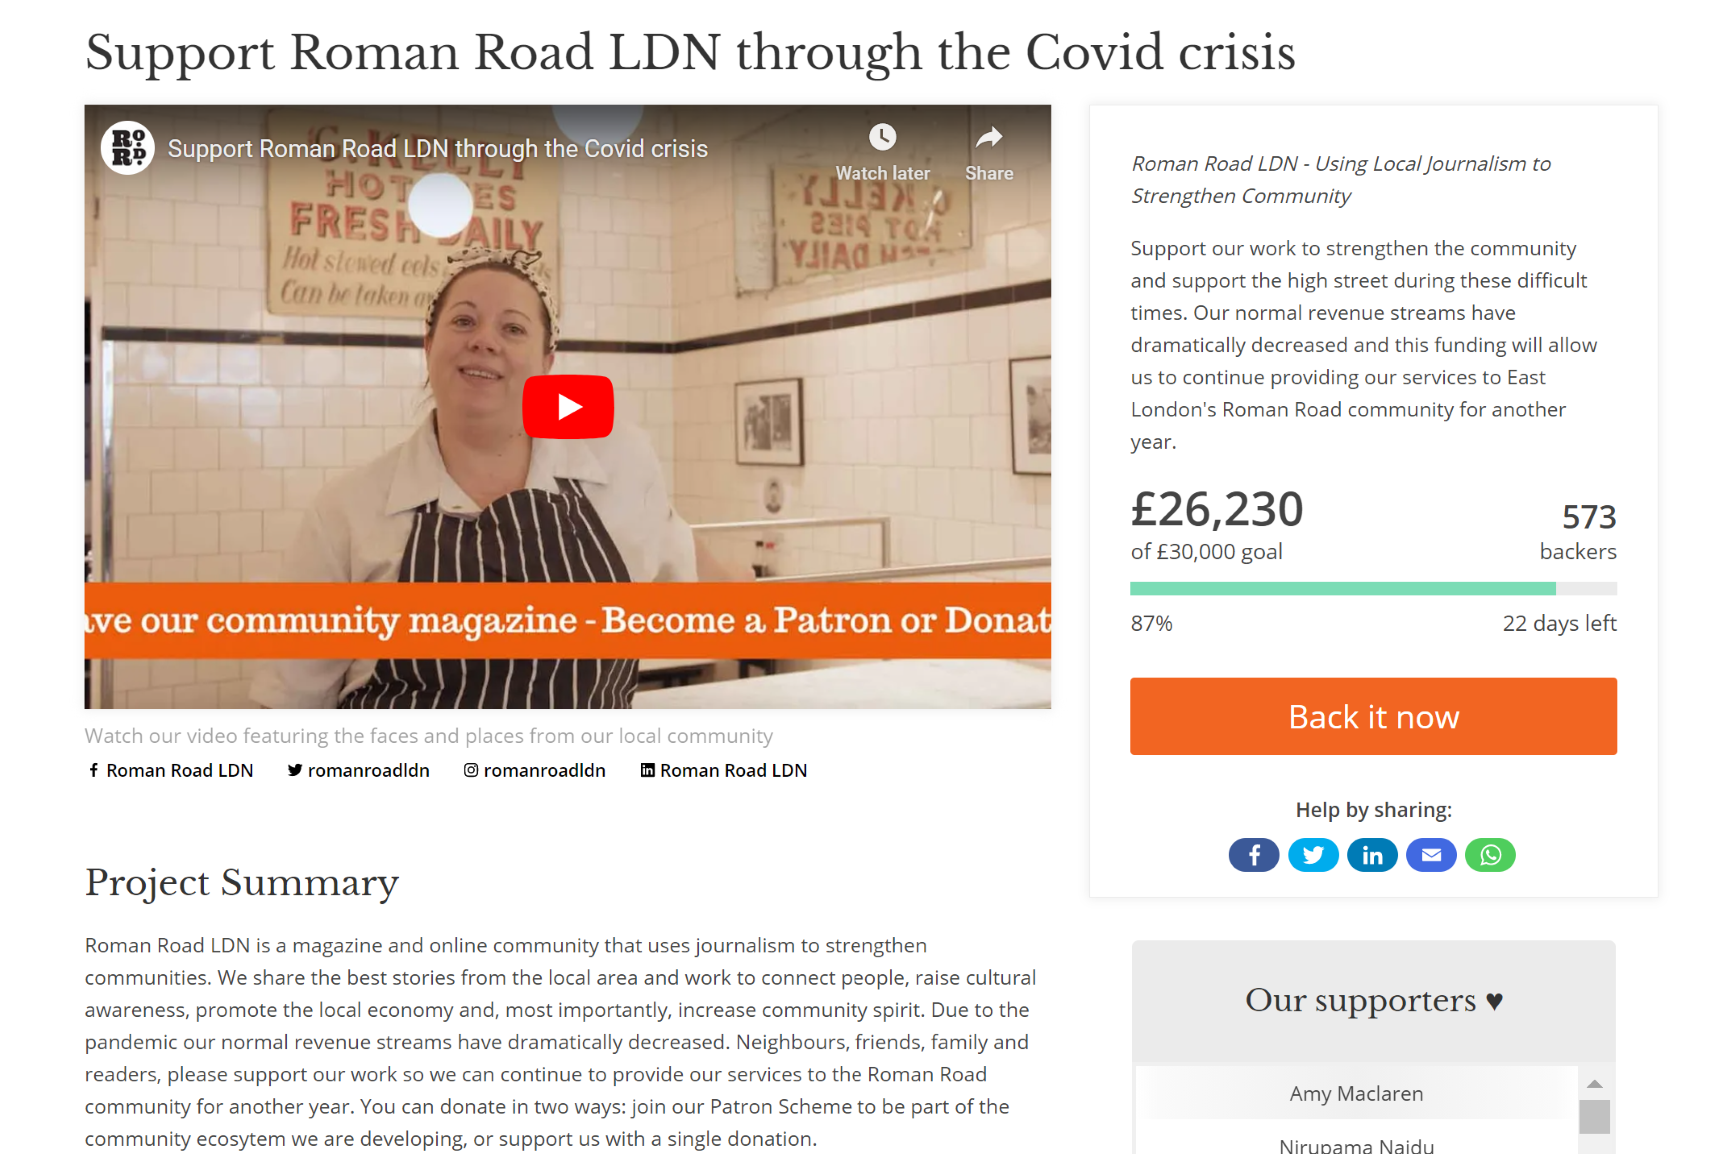 Screenshot of crowdfunding page on Roman Road LDN online magazine in East London